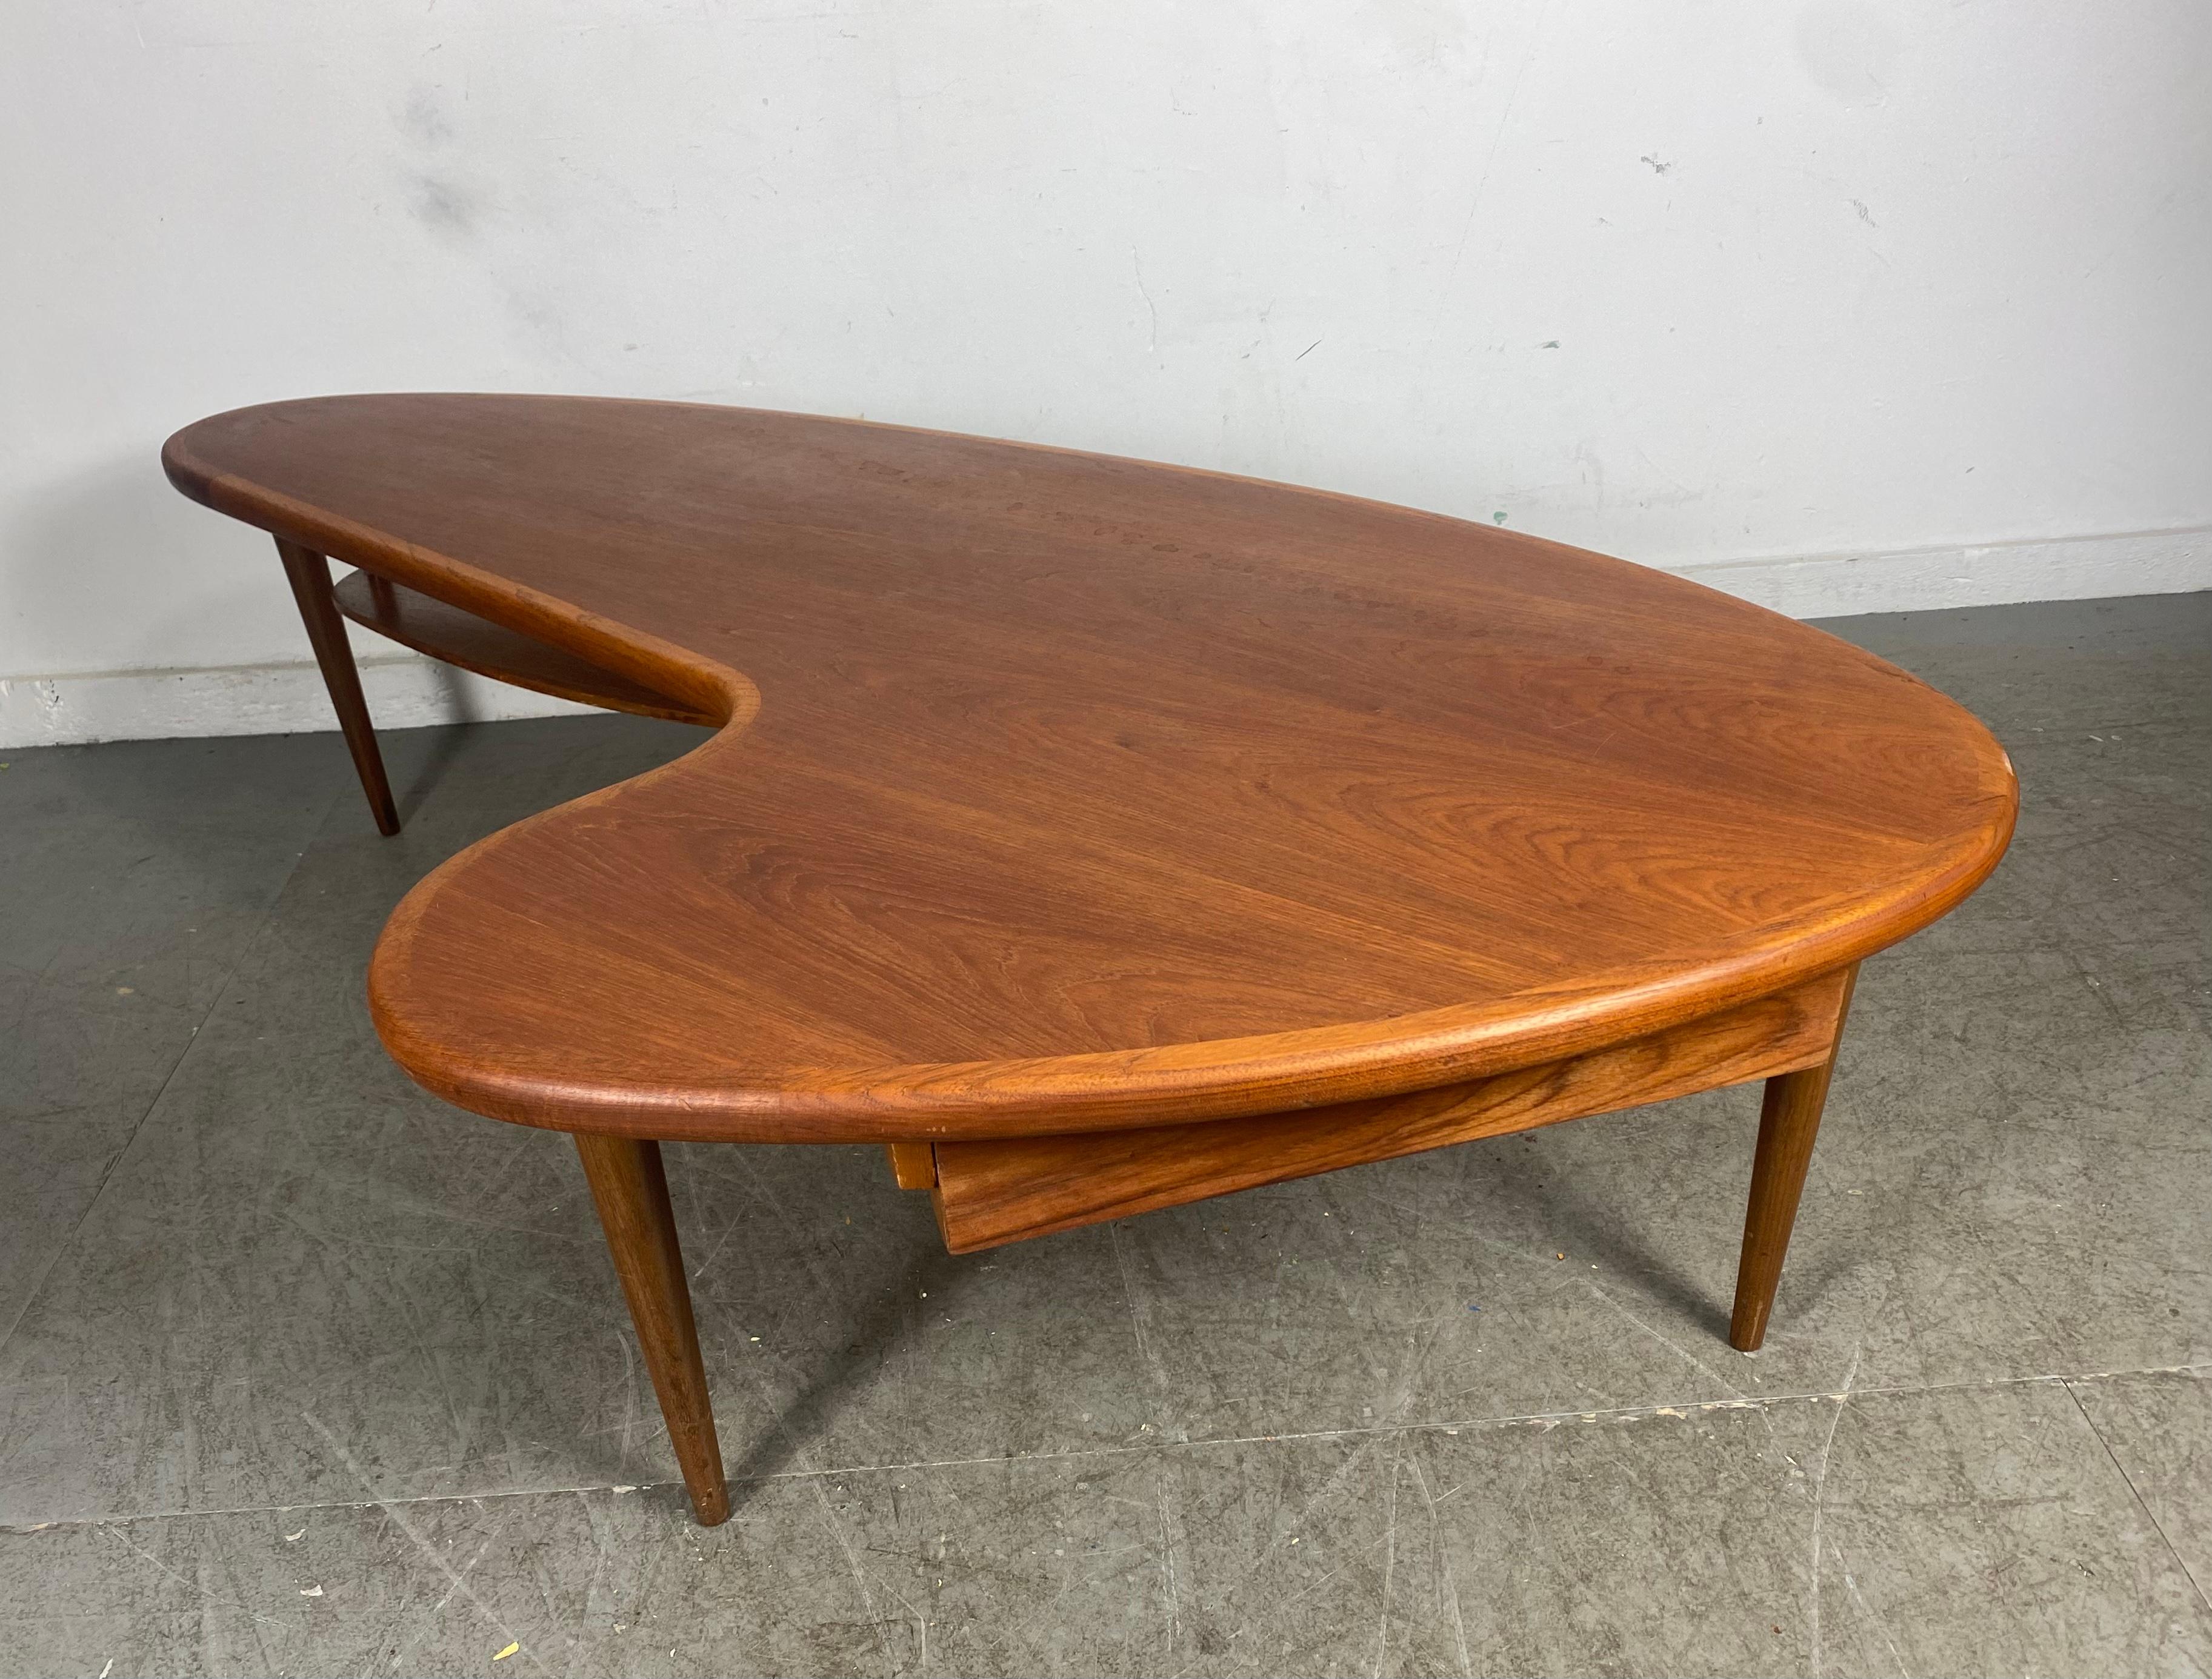 Classic midcentury walnut Boomerang coffee / cocktail table with drawer.Wonderful design,,proportion, patina,, swing out drawer,Hand delivery avail to New York City or anywhere en route from Buffalo NY.